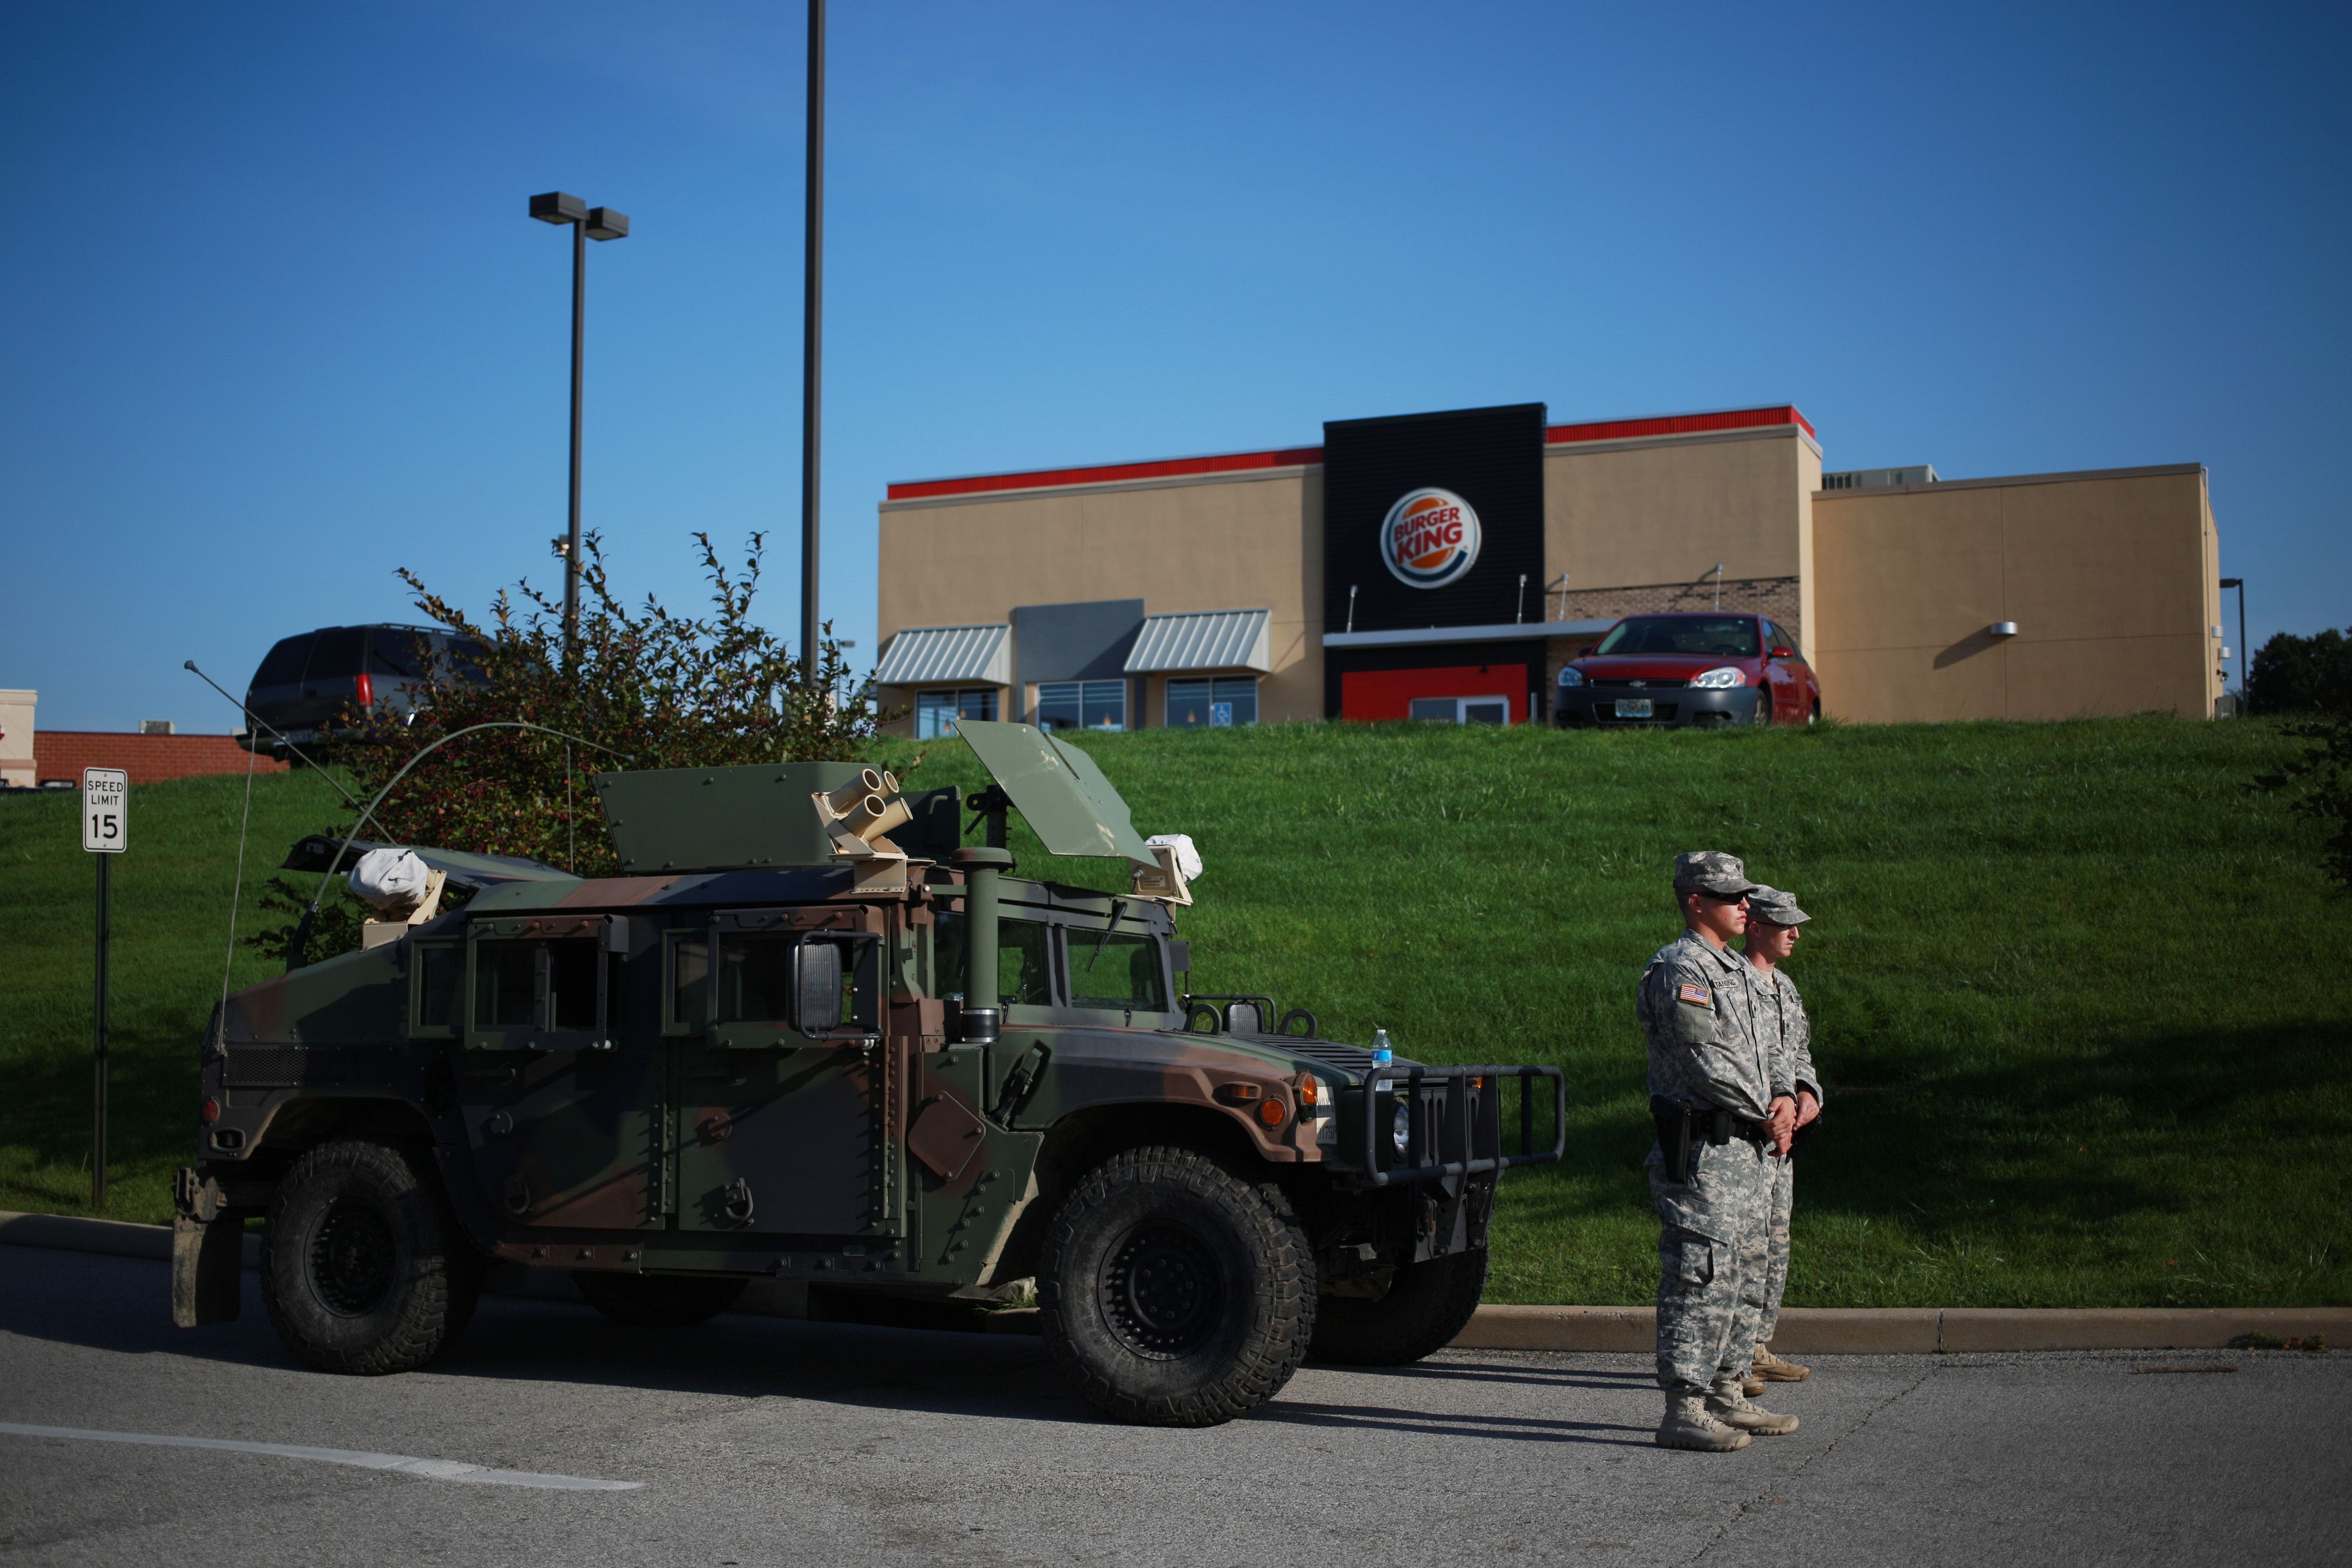 Soldiers from the Missouri National Guard stand in front of their Humvee vehicle outside a Burger King restaurant, operated by Burger King Worldwide Inc., as they man an entrance to a temporary police command center in Ferguson, Missouri, U.S., on Aug. 20, 2014.